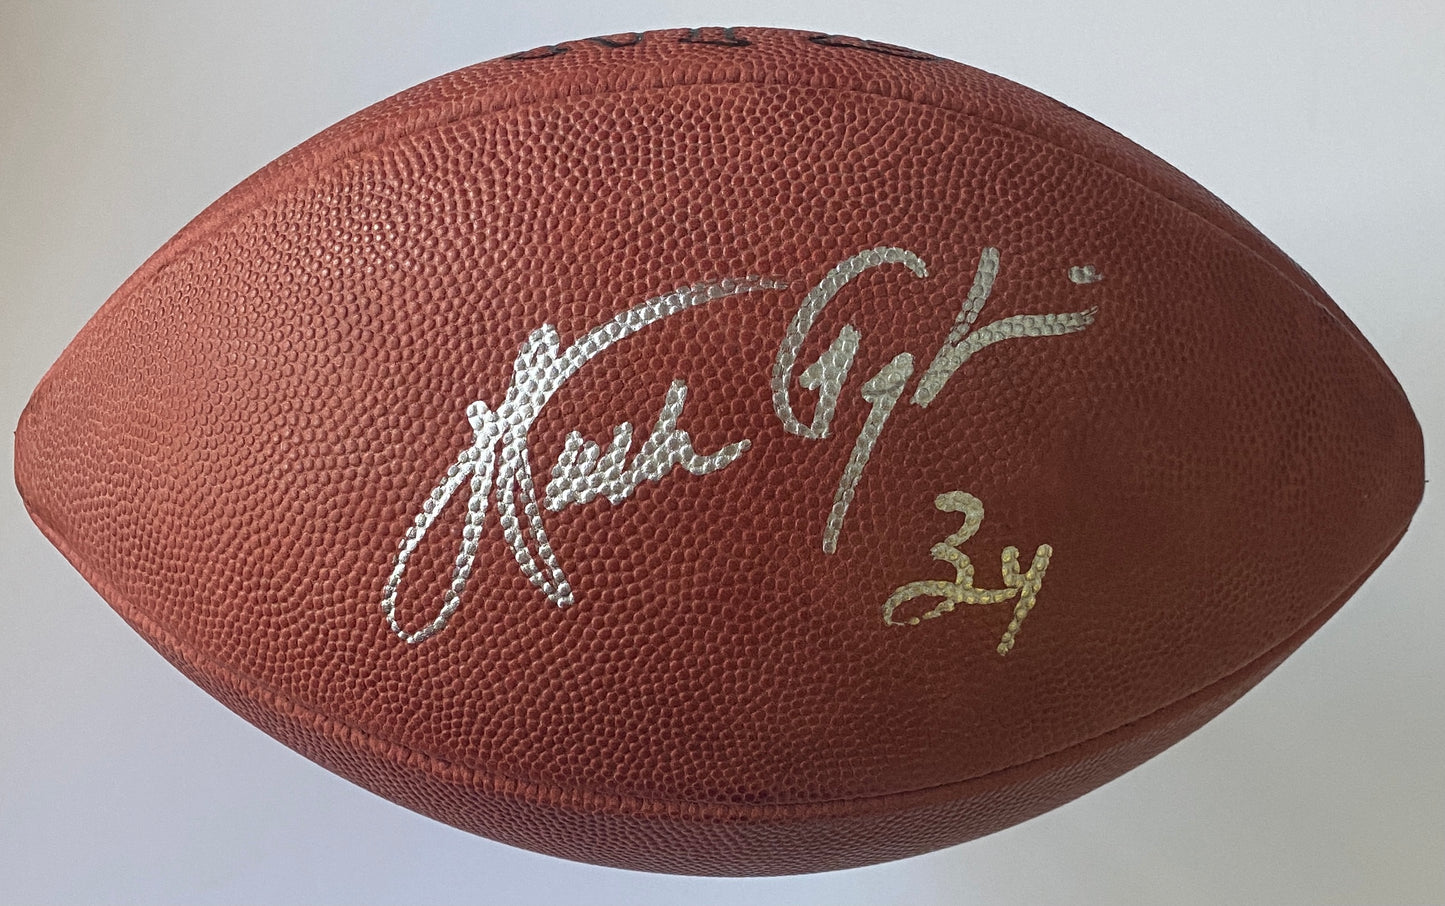 Walter Payton Signed Football Authenticated By The Walter Payton Foundation